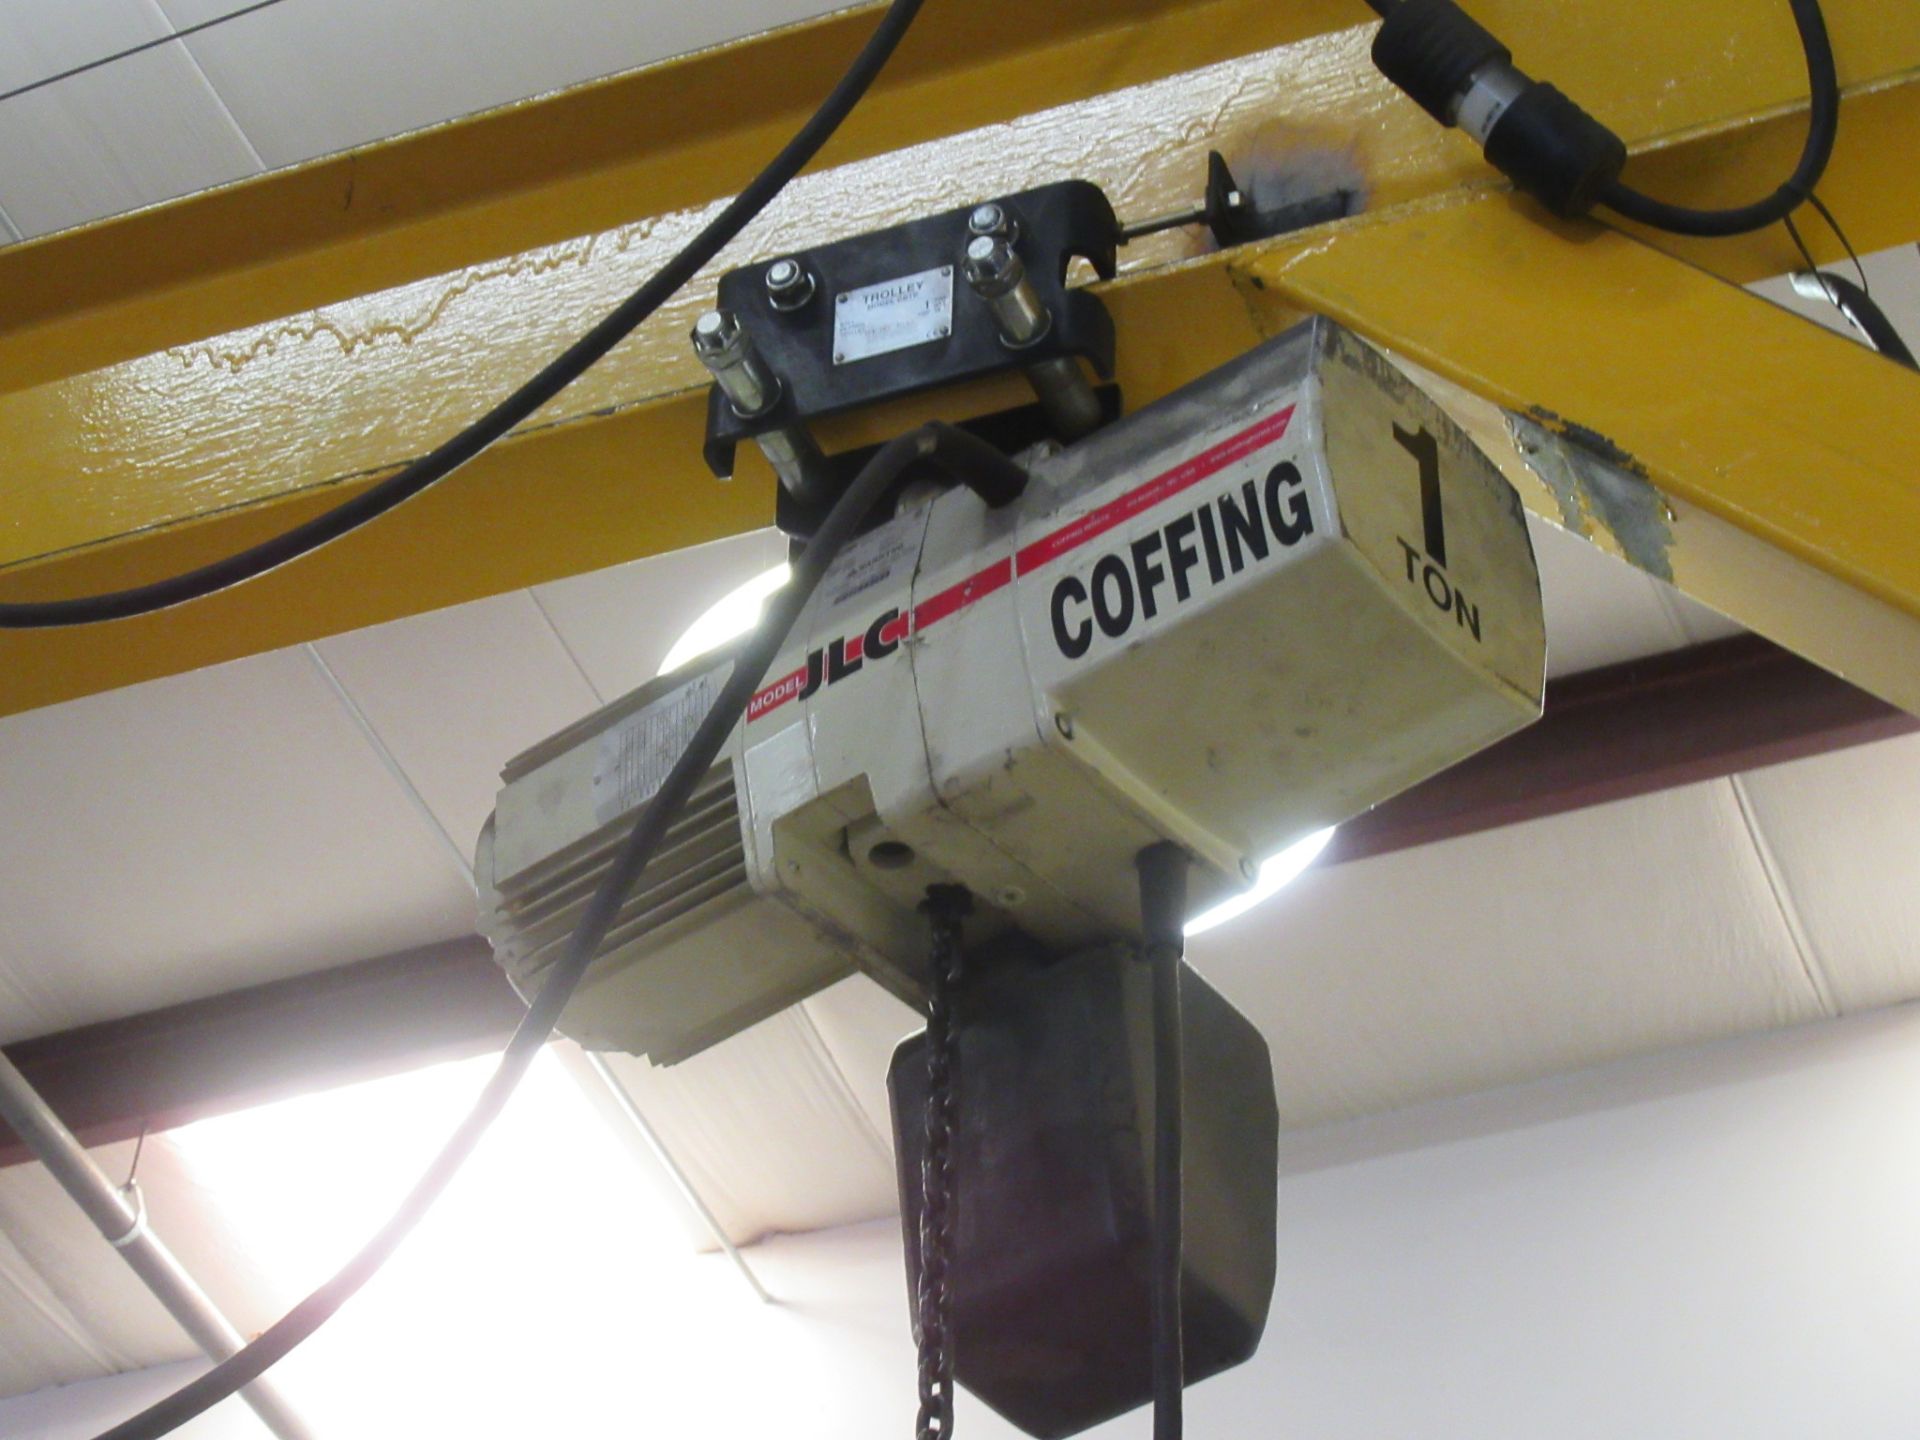 1 TON PORTABLE GANTRY CRANE WITH COFFING JLC 1 TON ELECTRIC CHAIN HOIST, APPROX. 16' SPAN - Image 2 of 2